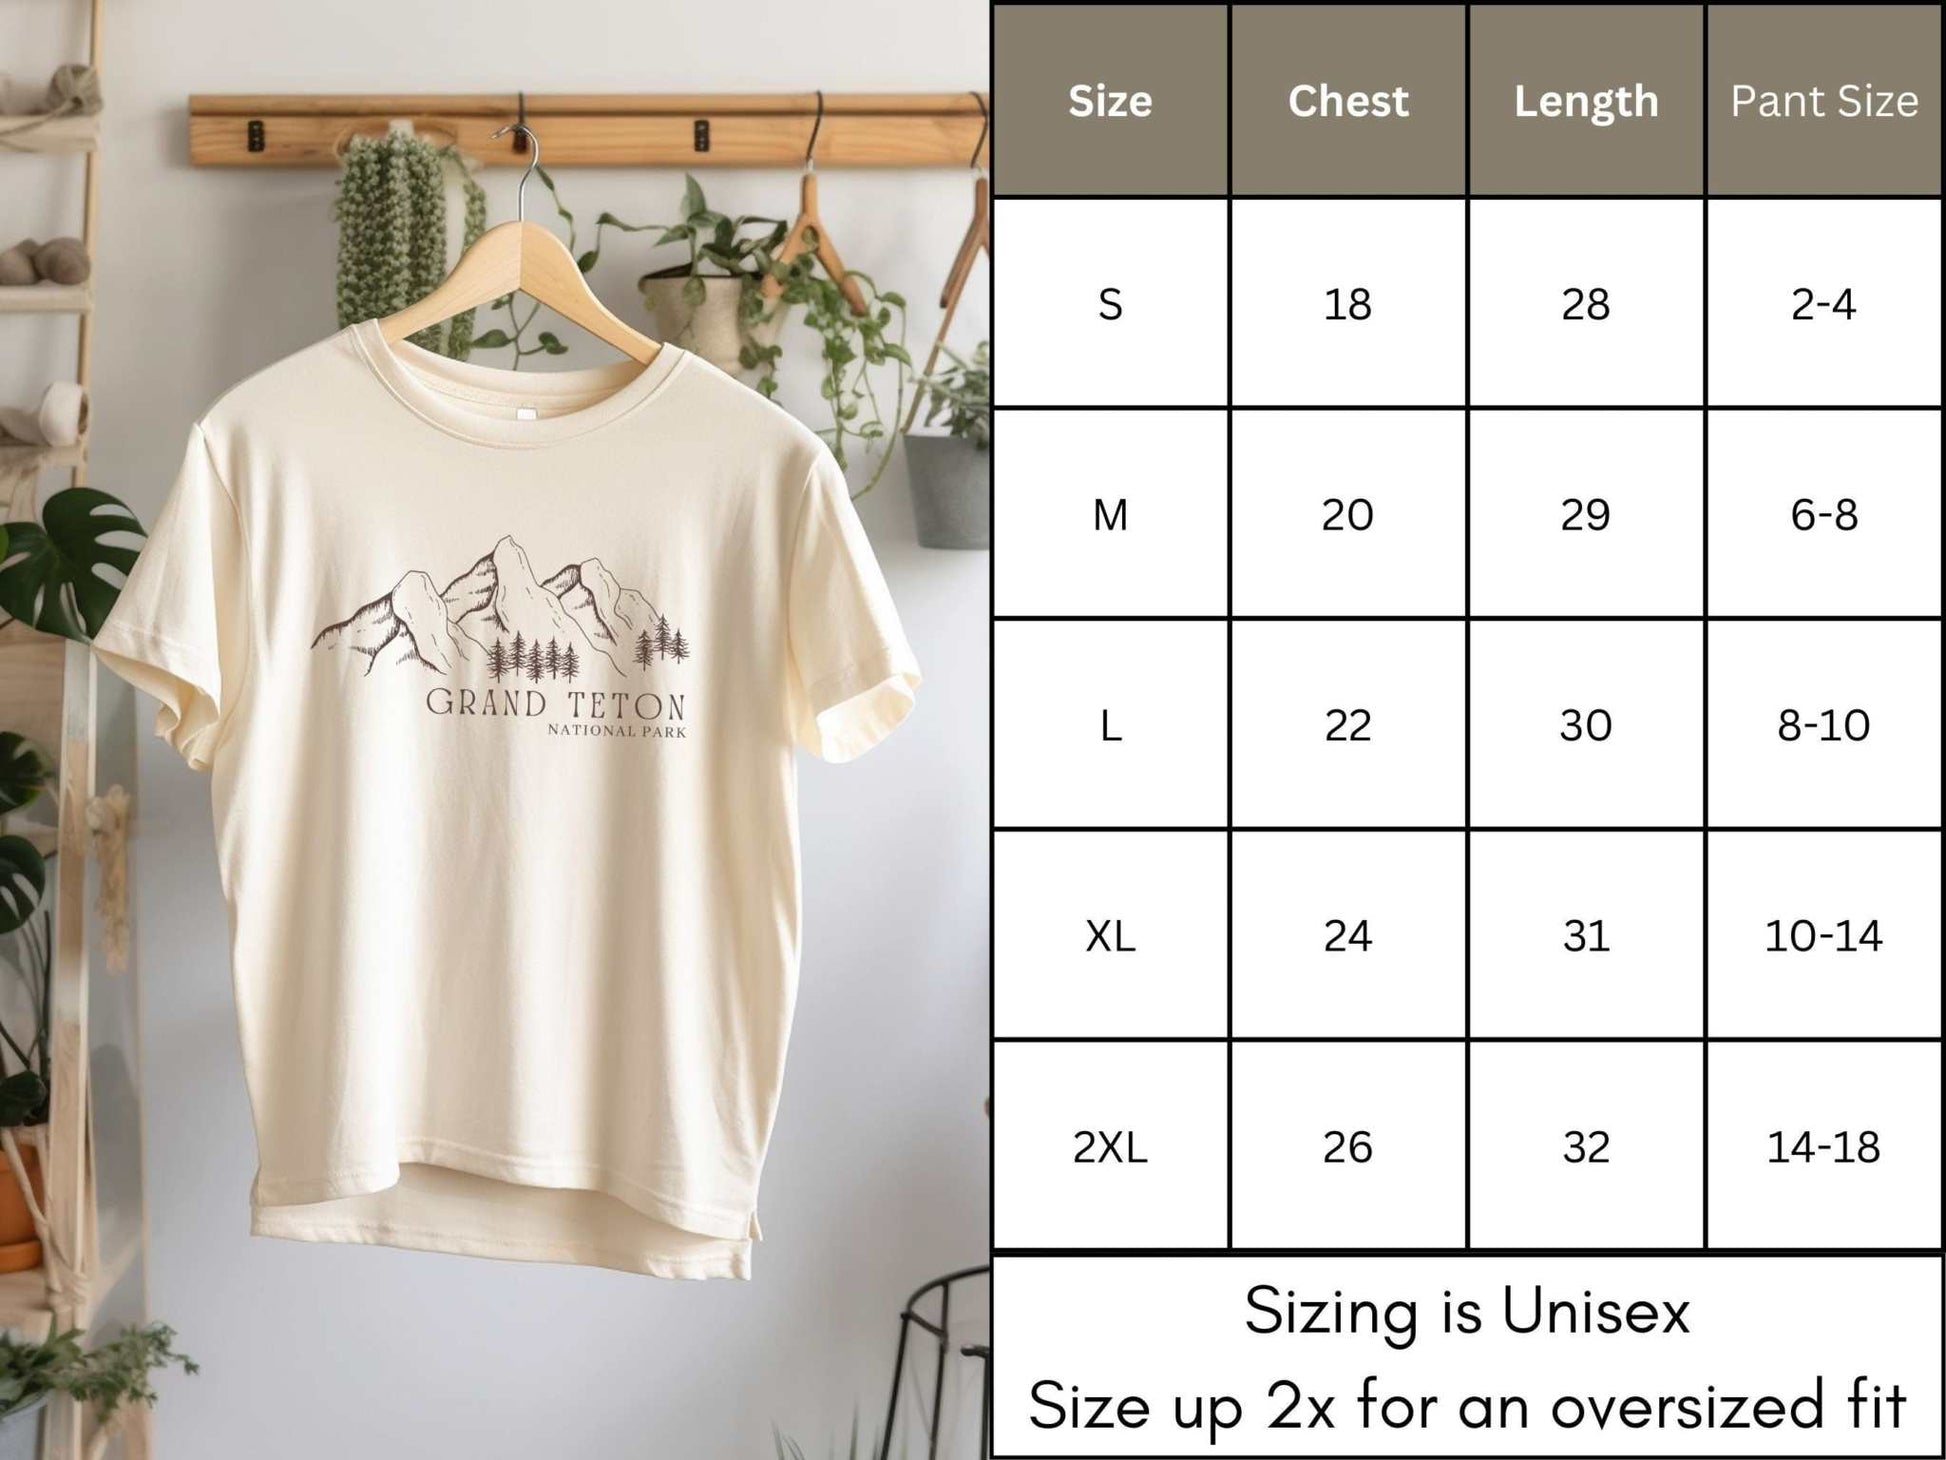 Grand Teton National Park ShirtBring the beauty of Grand Teton National Park into your wardrobe with this vintage styled t-shirt inspired by the magic of this iconic park.
Details:
- 100% cotton -